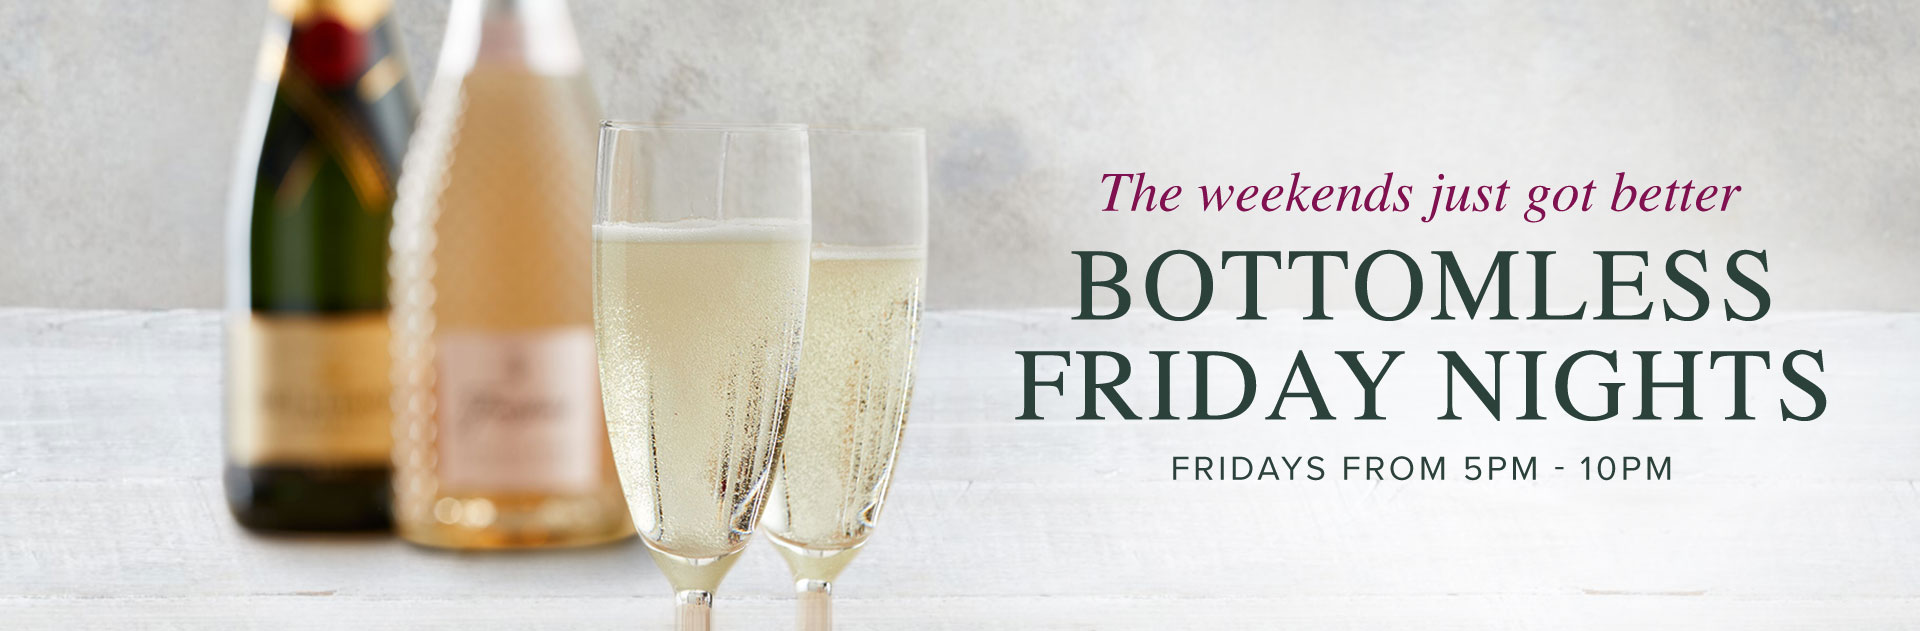 Bottomless Friday at The Apple Tree